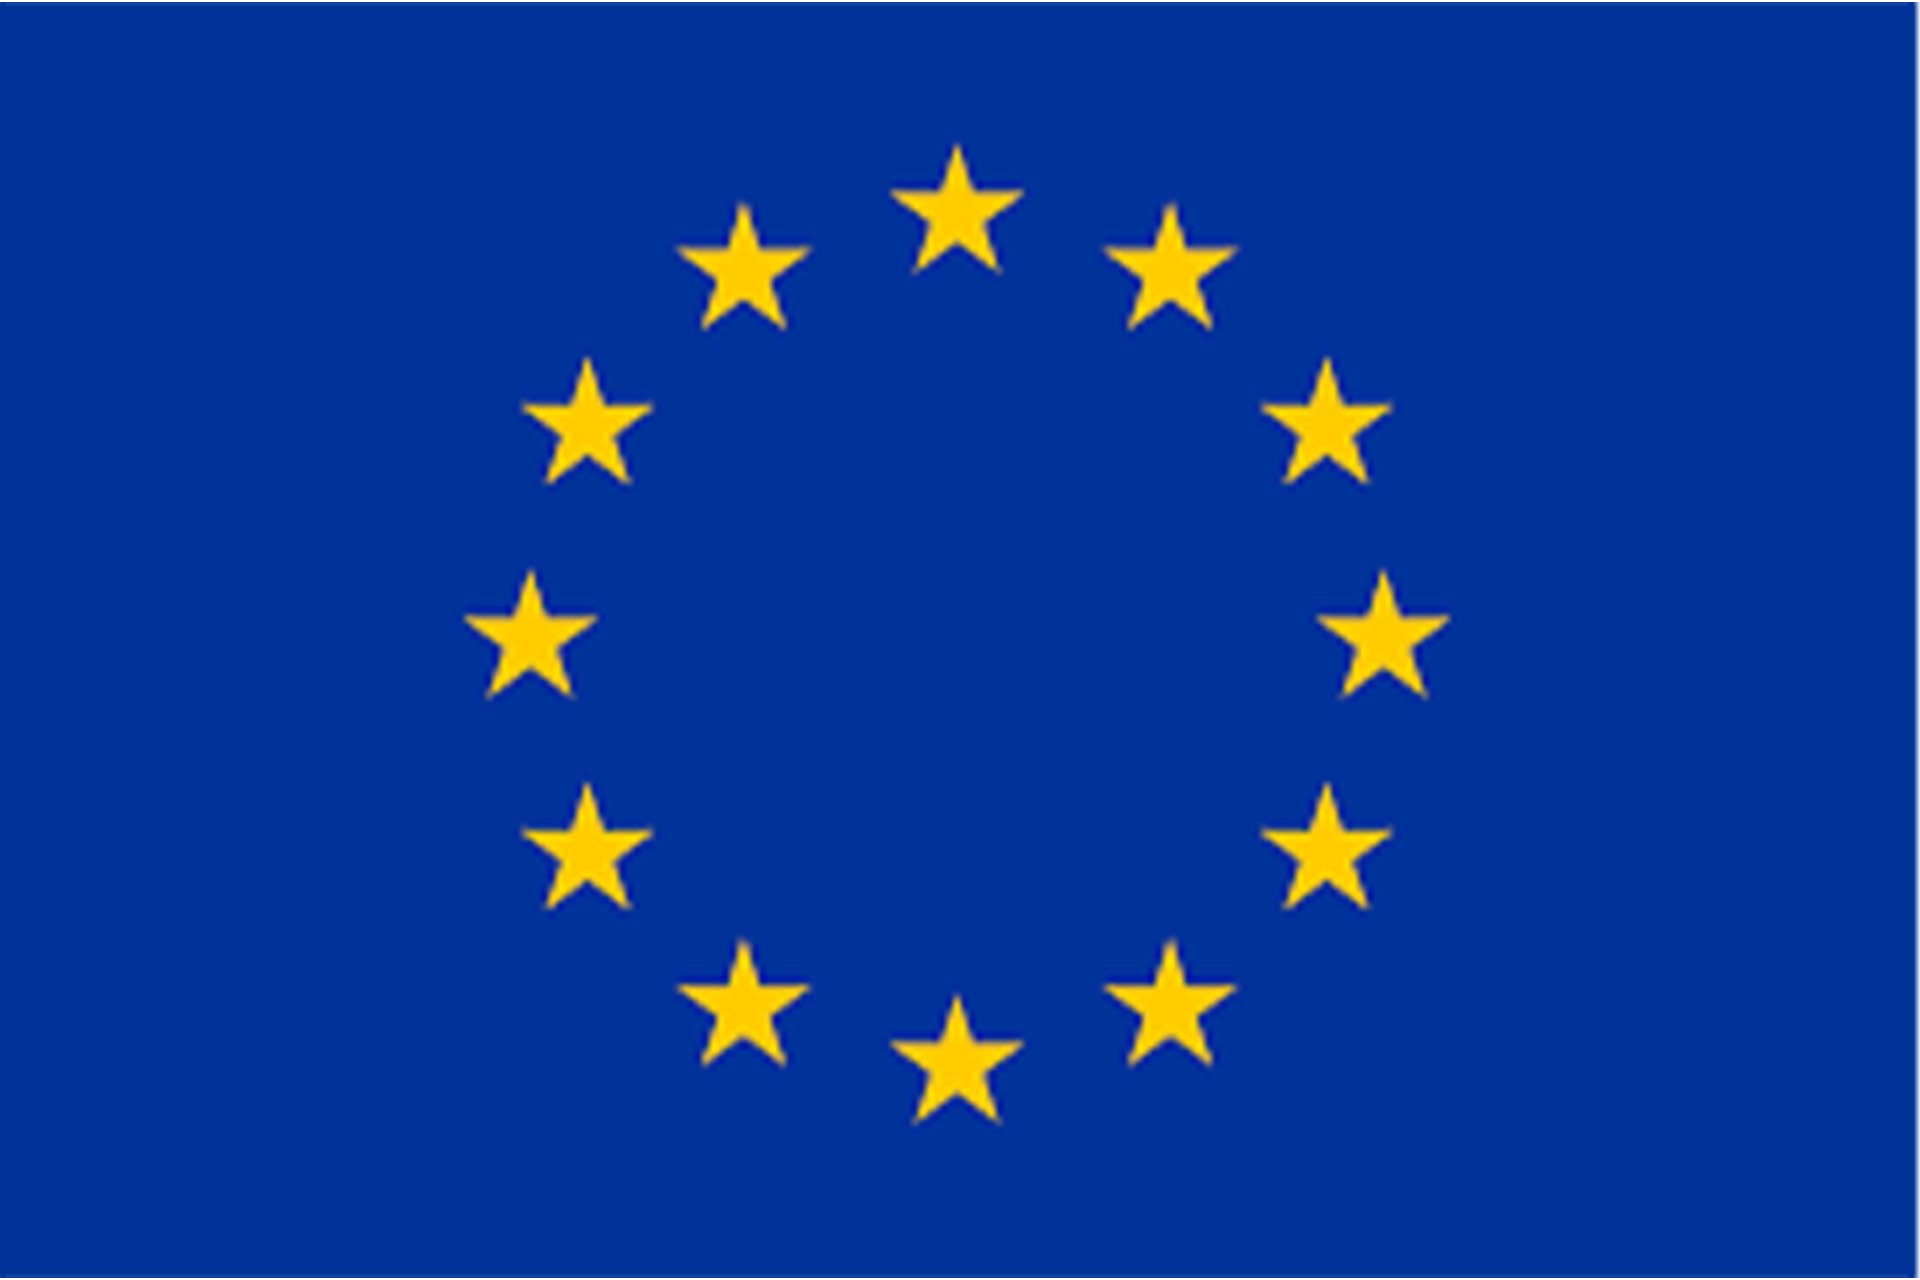 Statement by the Spokesperson of the EU on the recent appointments of the Intergovernmental Authority on Development